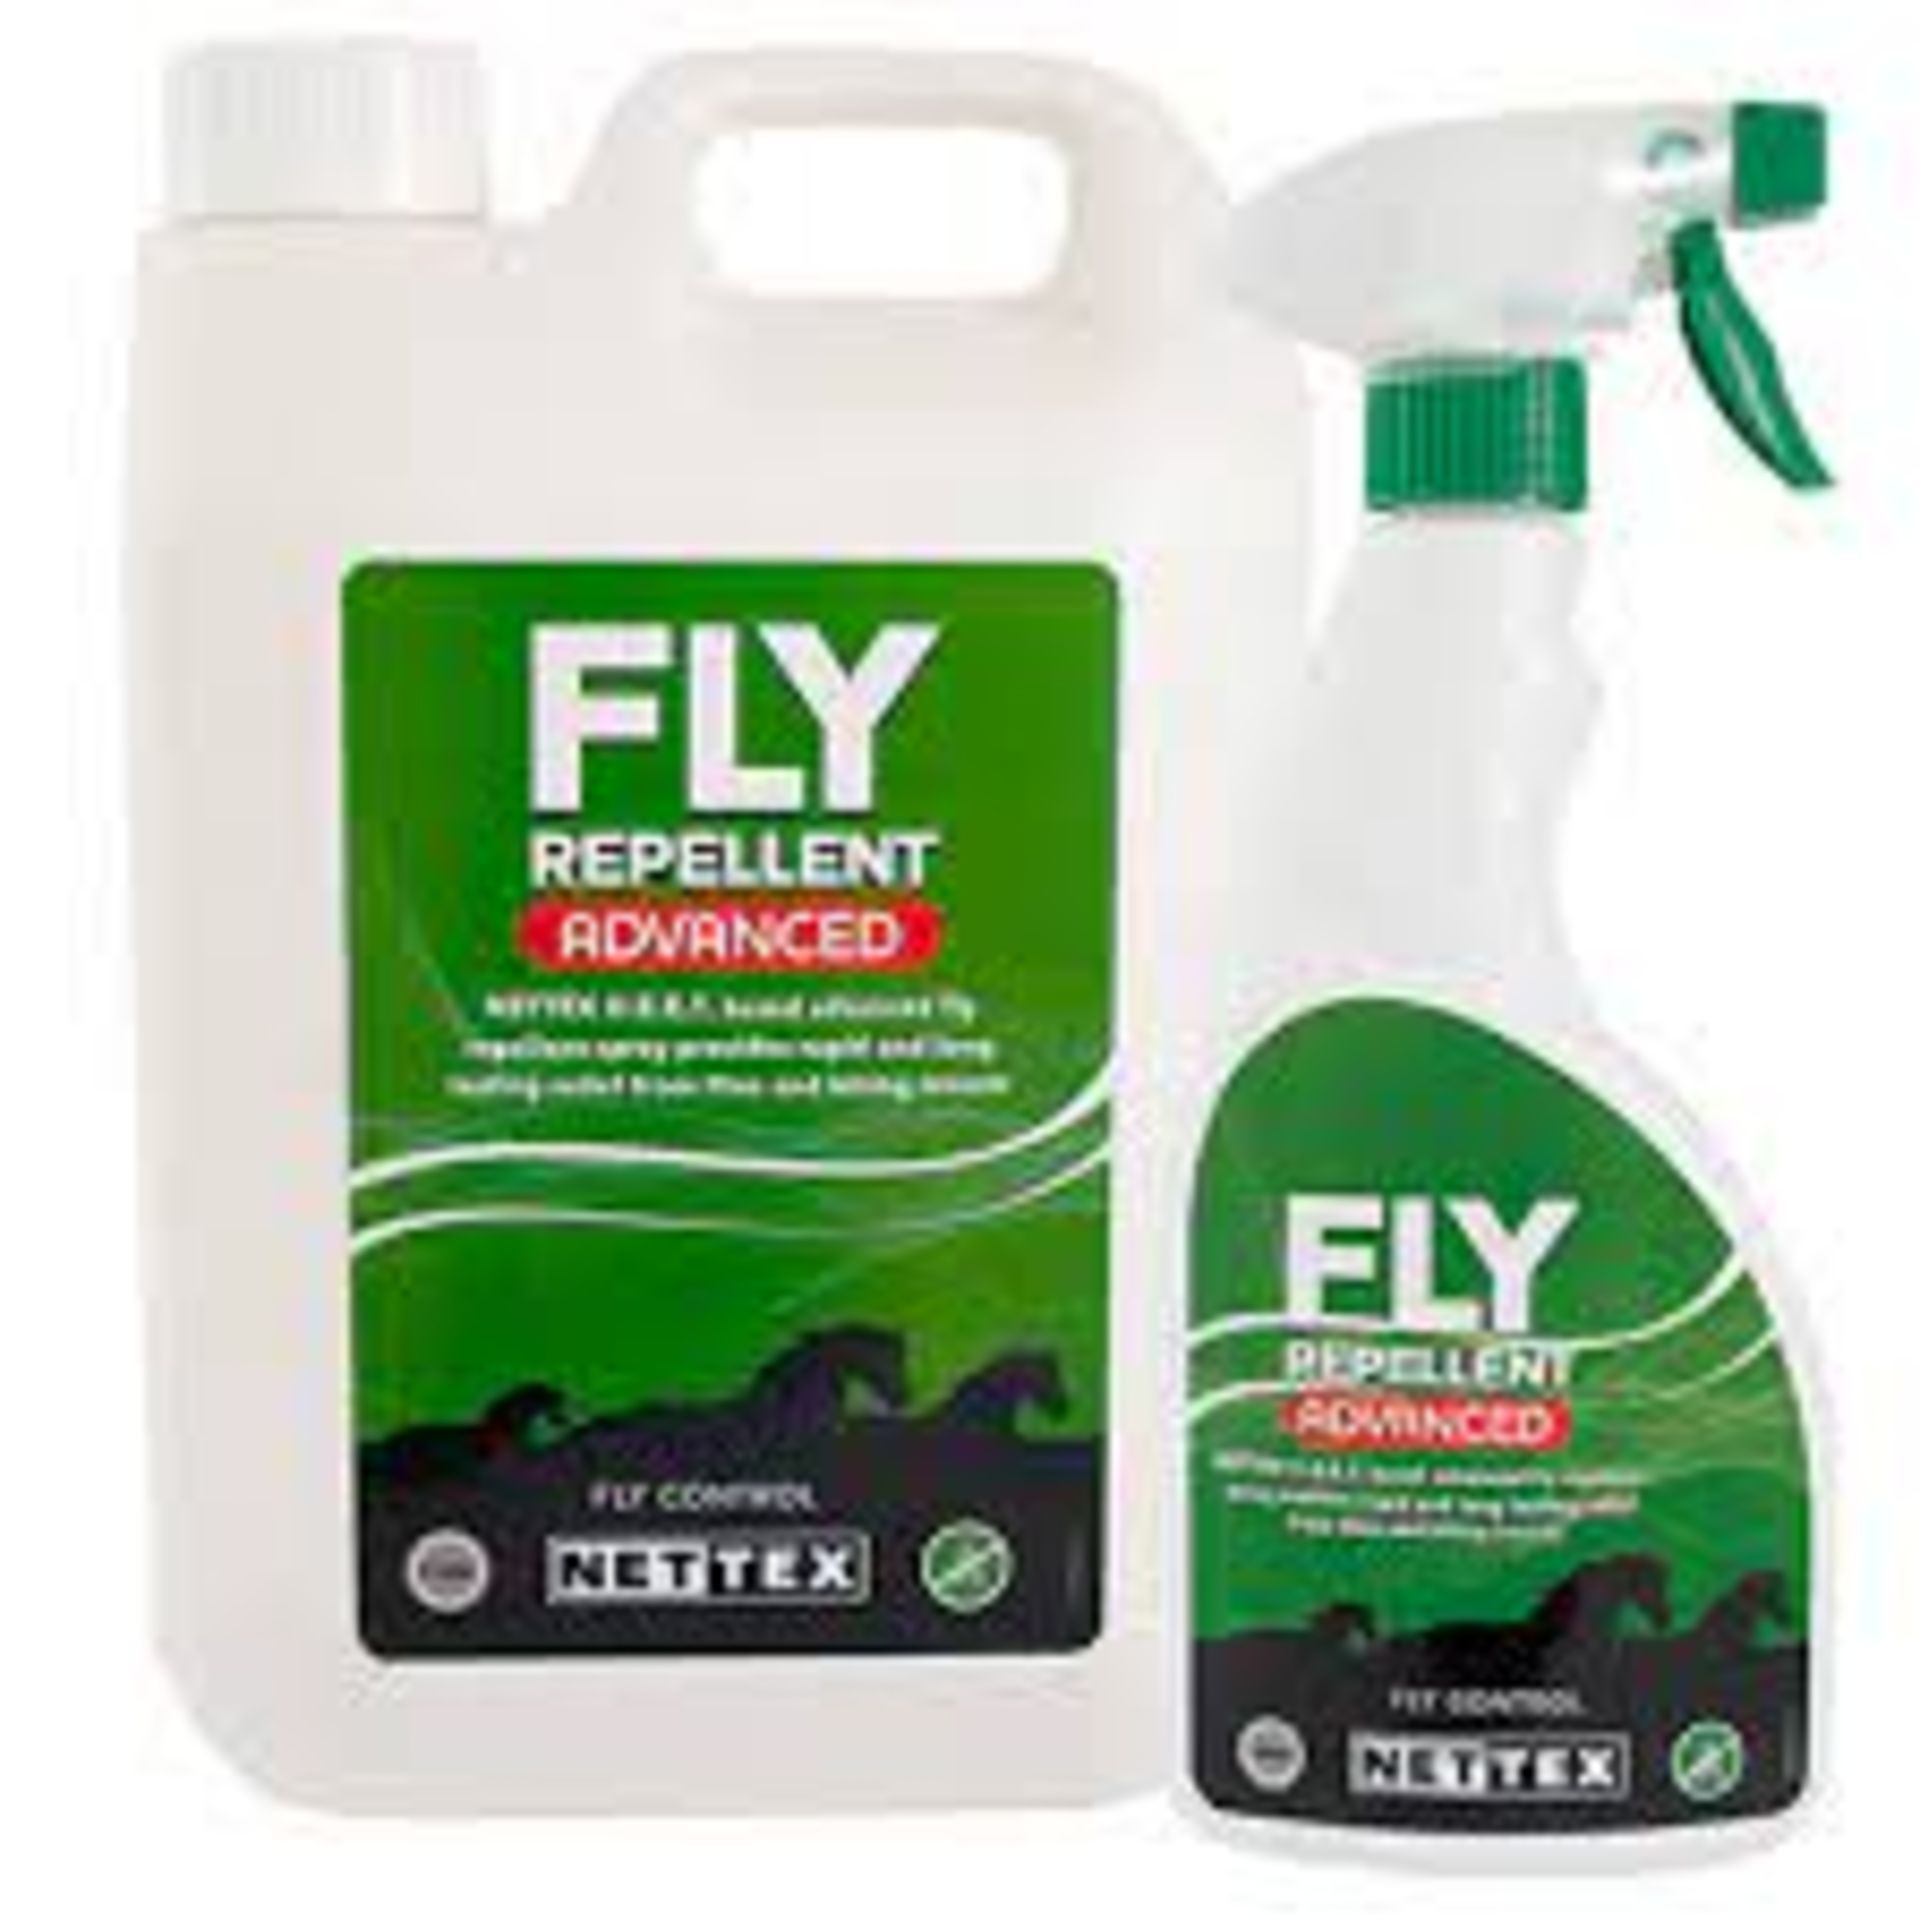 600 X BRAND NEW NETTEX FLY REPELLENT ADVANCED 500ML RRP £65 PER PACK OF 6, Contains powerful and